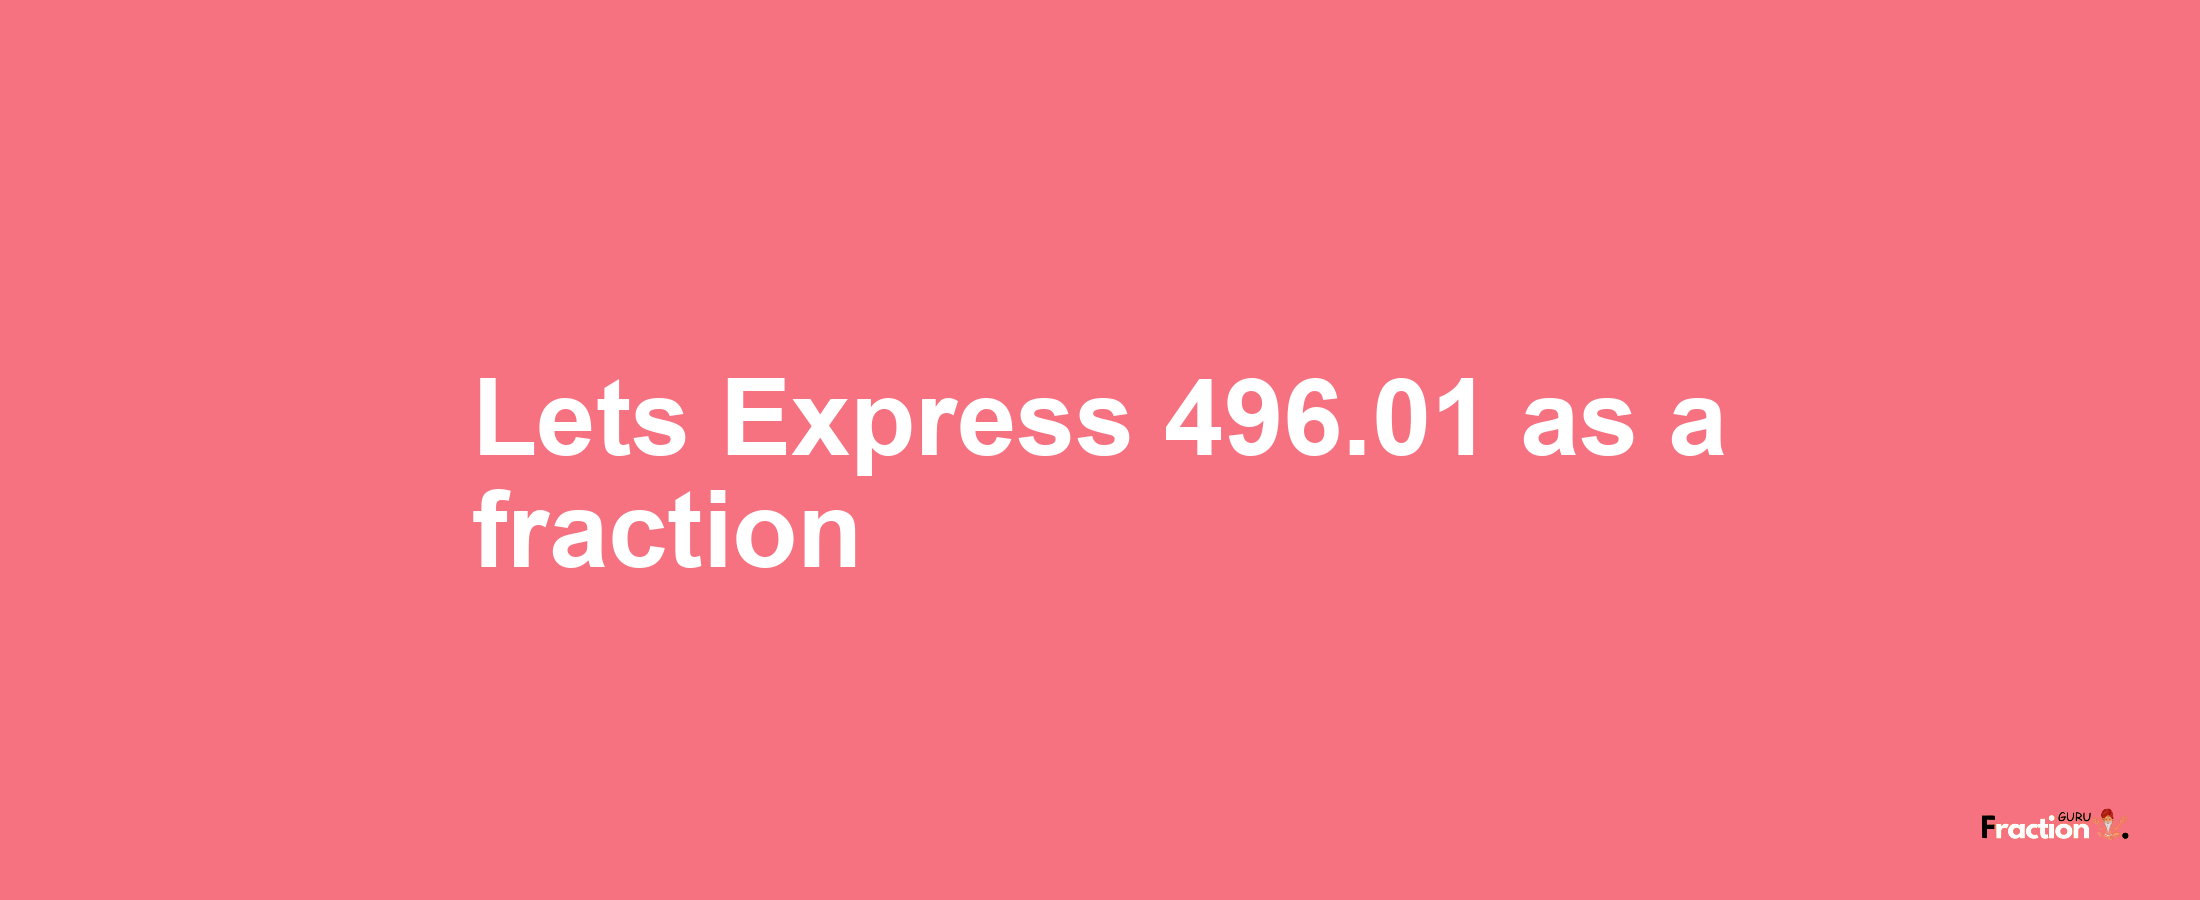 Lets Express 496.01 as afraction